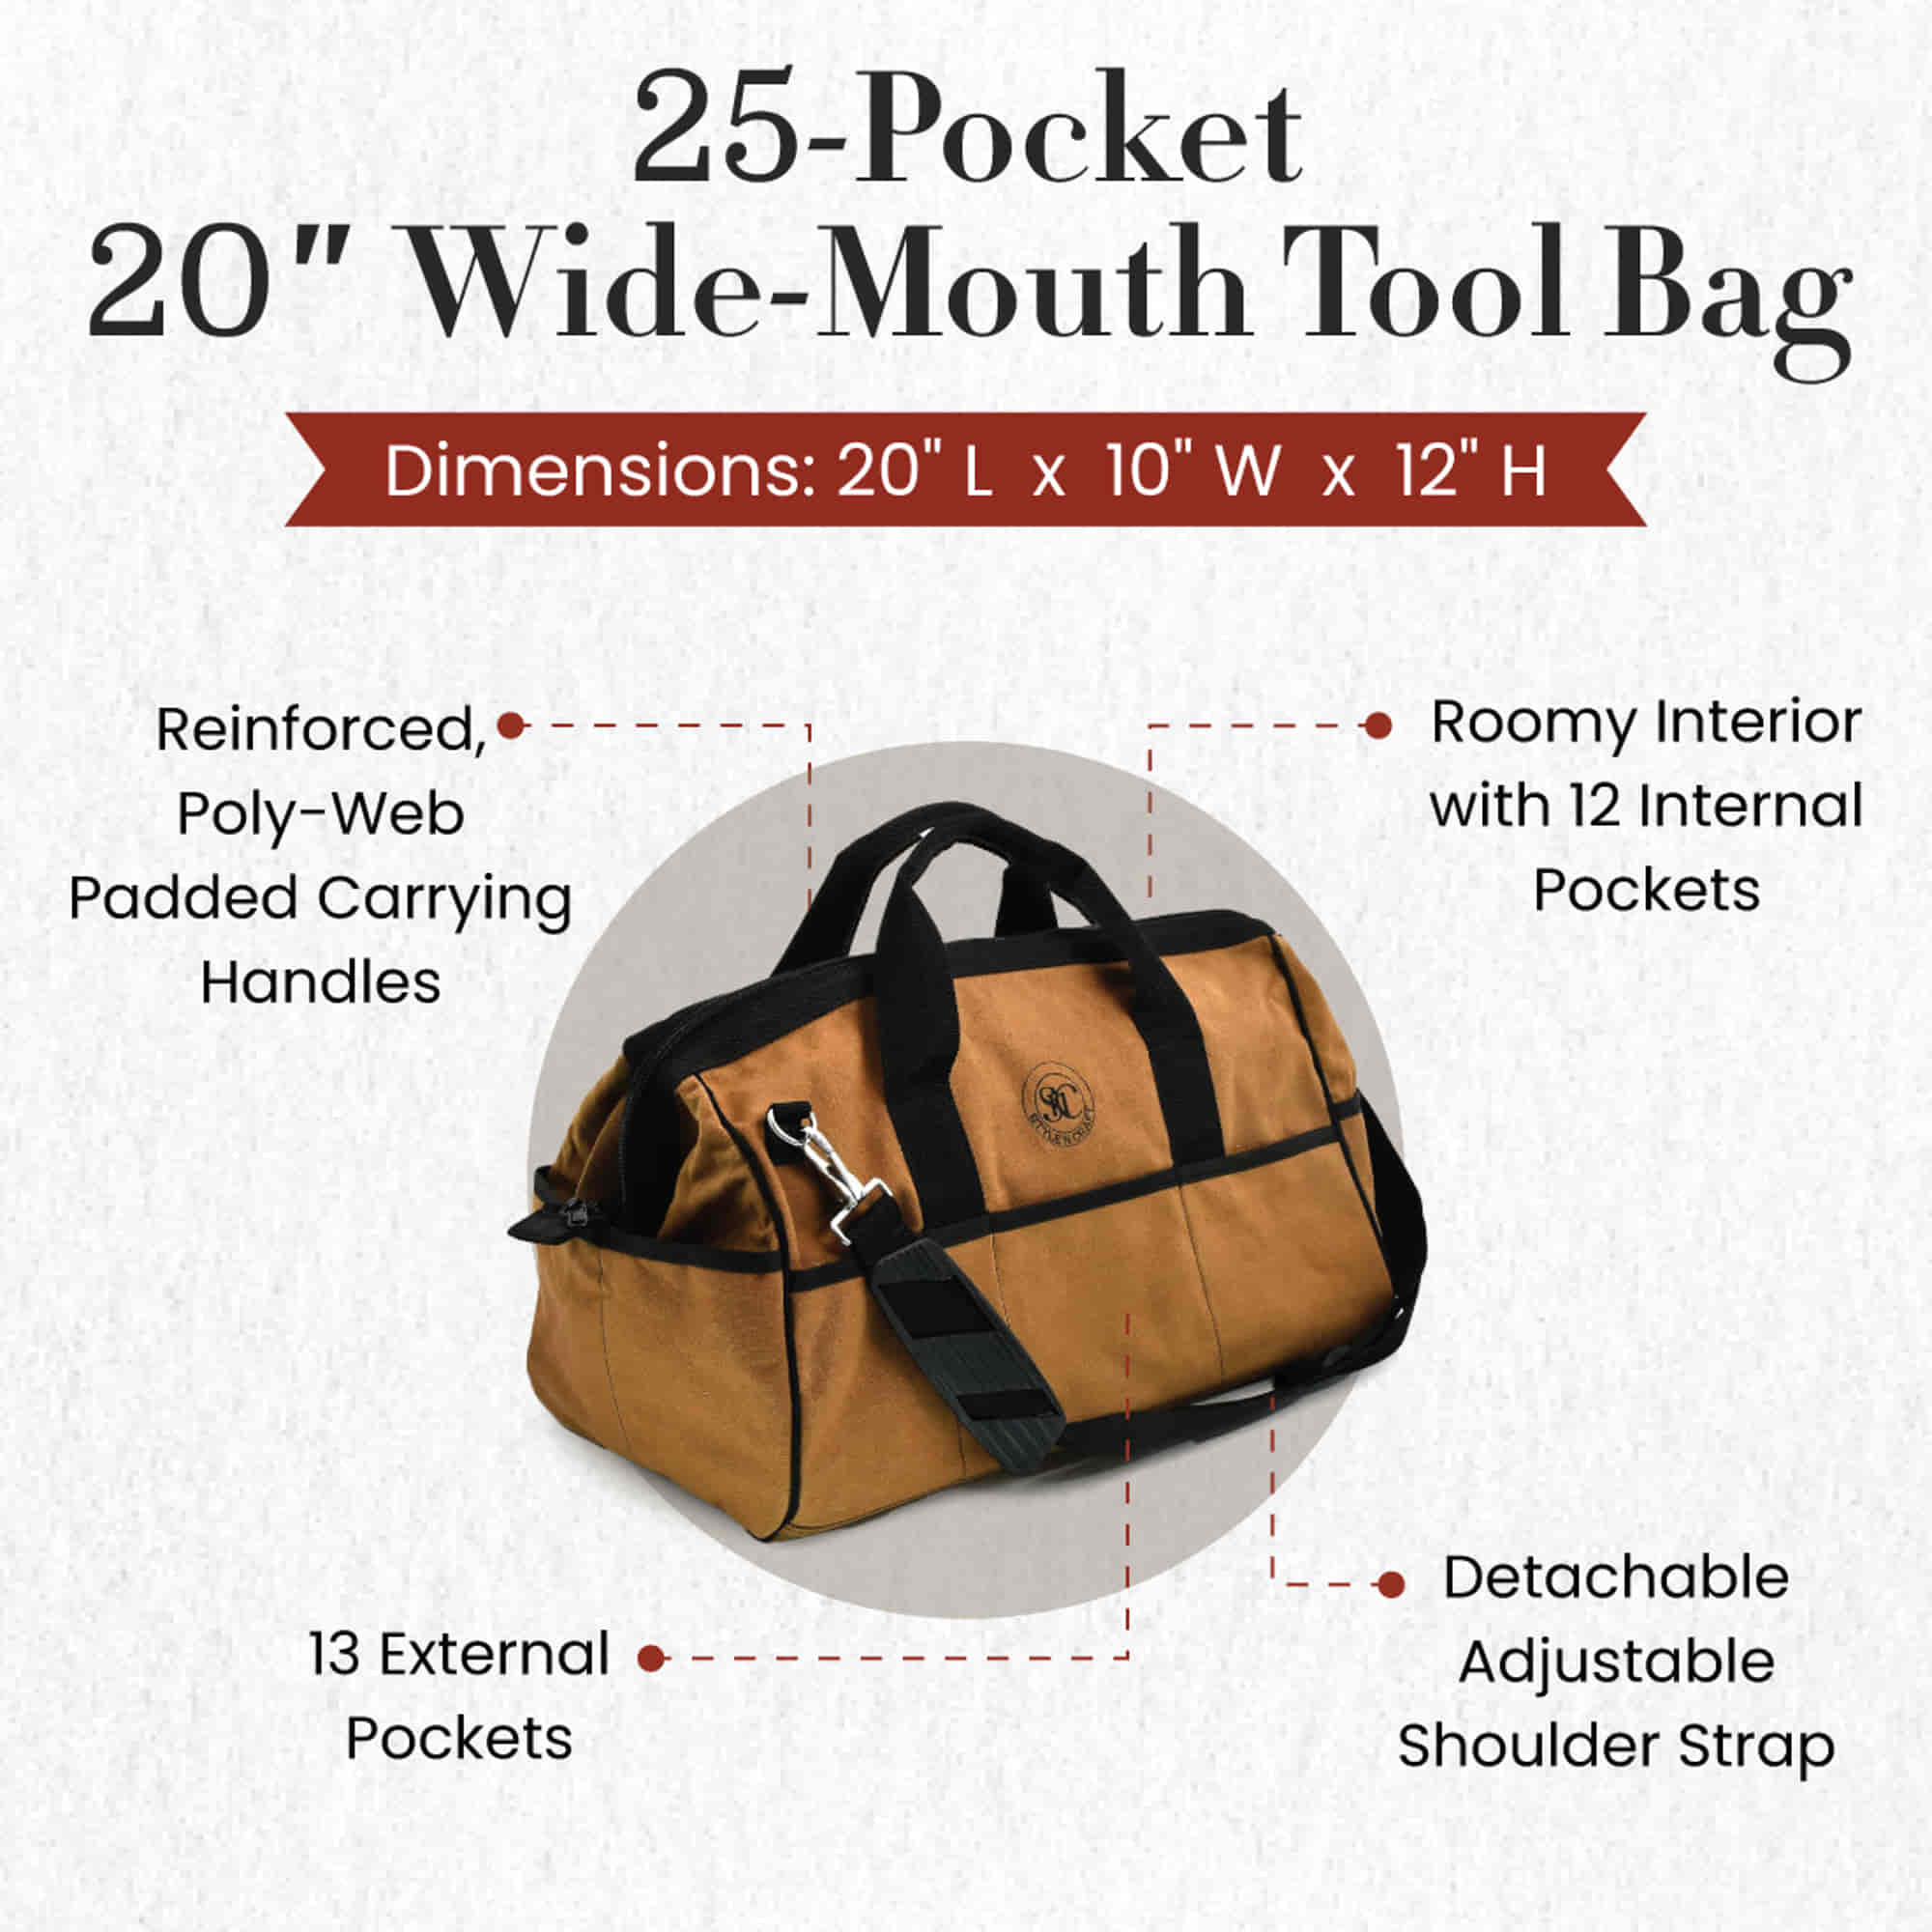 Wide Mouth Tool Bag | 25 Pocket 20 Inch Bag in Waterproof Canvas